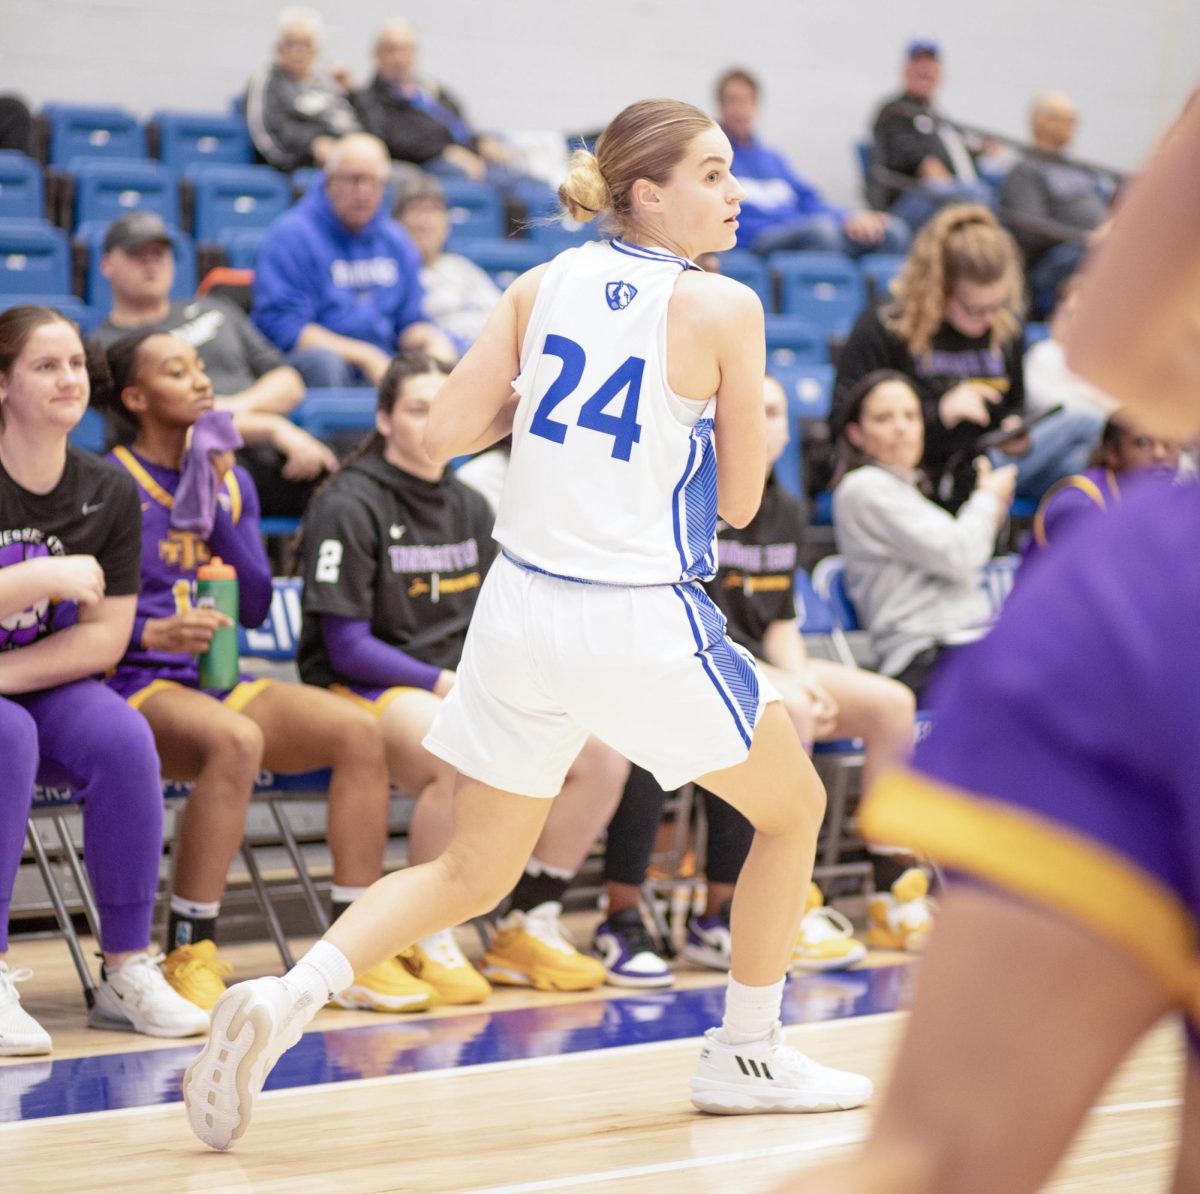 Ellie Buzzelle at the womens basketball. Eastern Illinois Pathers Vs Tennessee Tach Golden Eagles. During the final quater pathers pulled though to win 73-71 In Groniger Arena Thursday night.